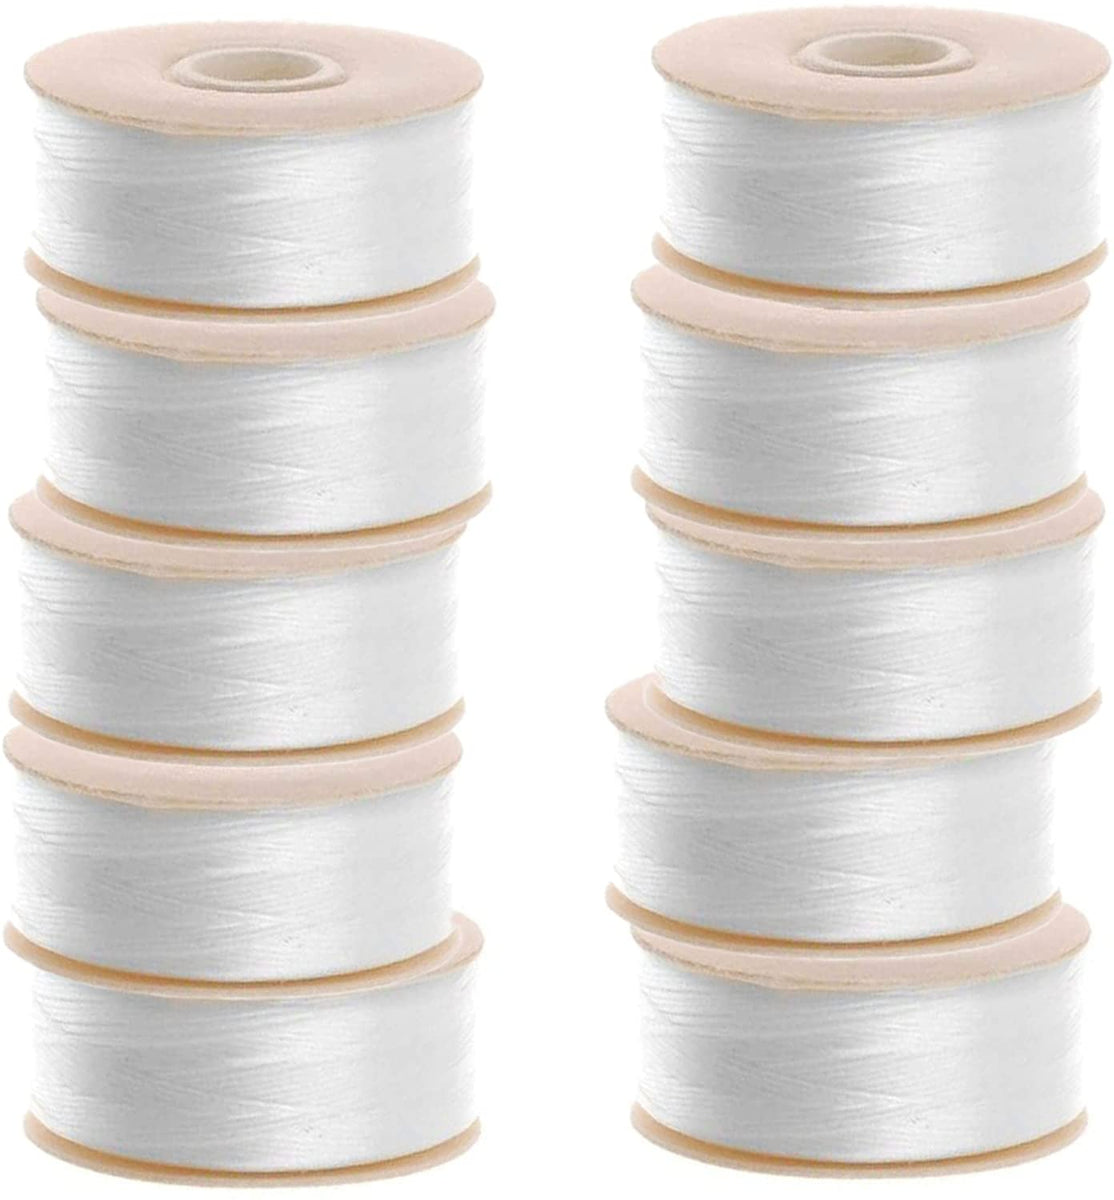 Nymo Nylon Beading Thread Size D for Delica Beads, 64 yd/58m, Grey